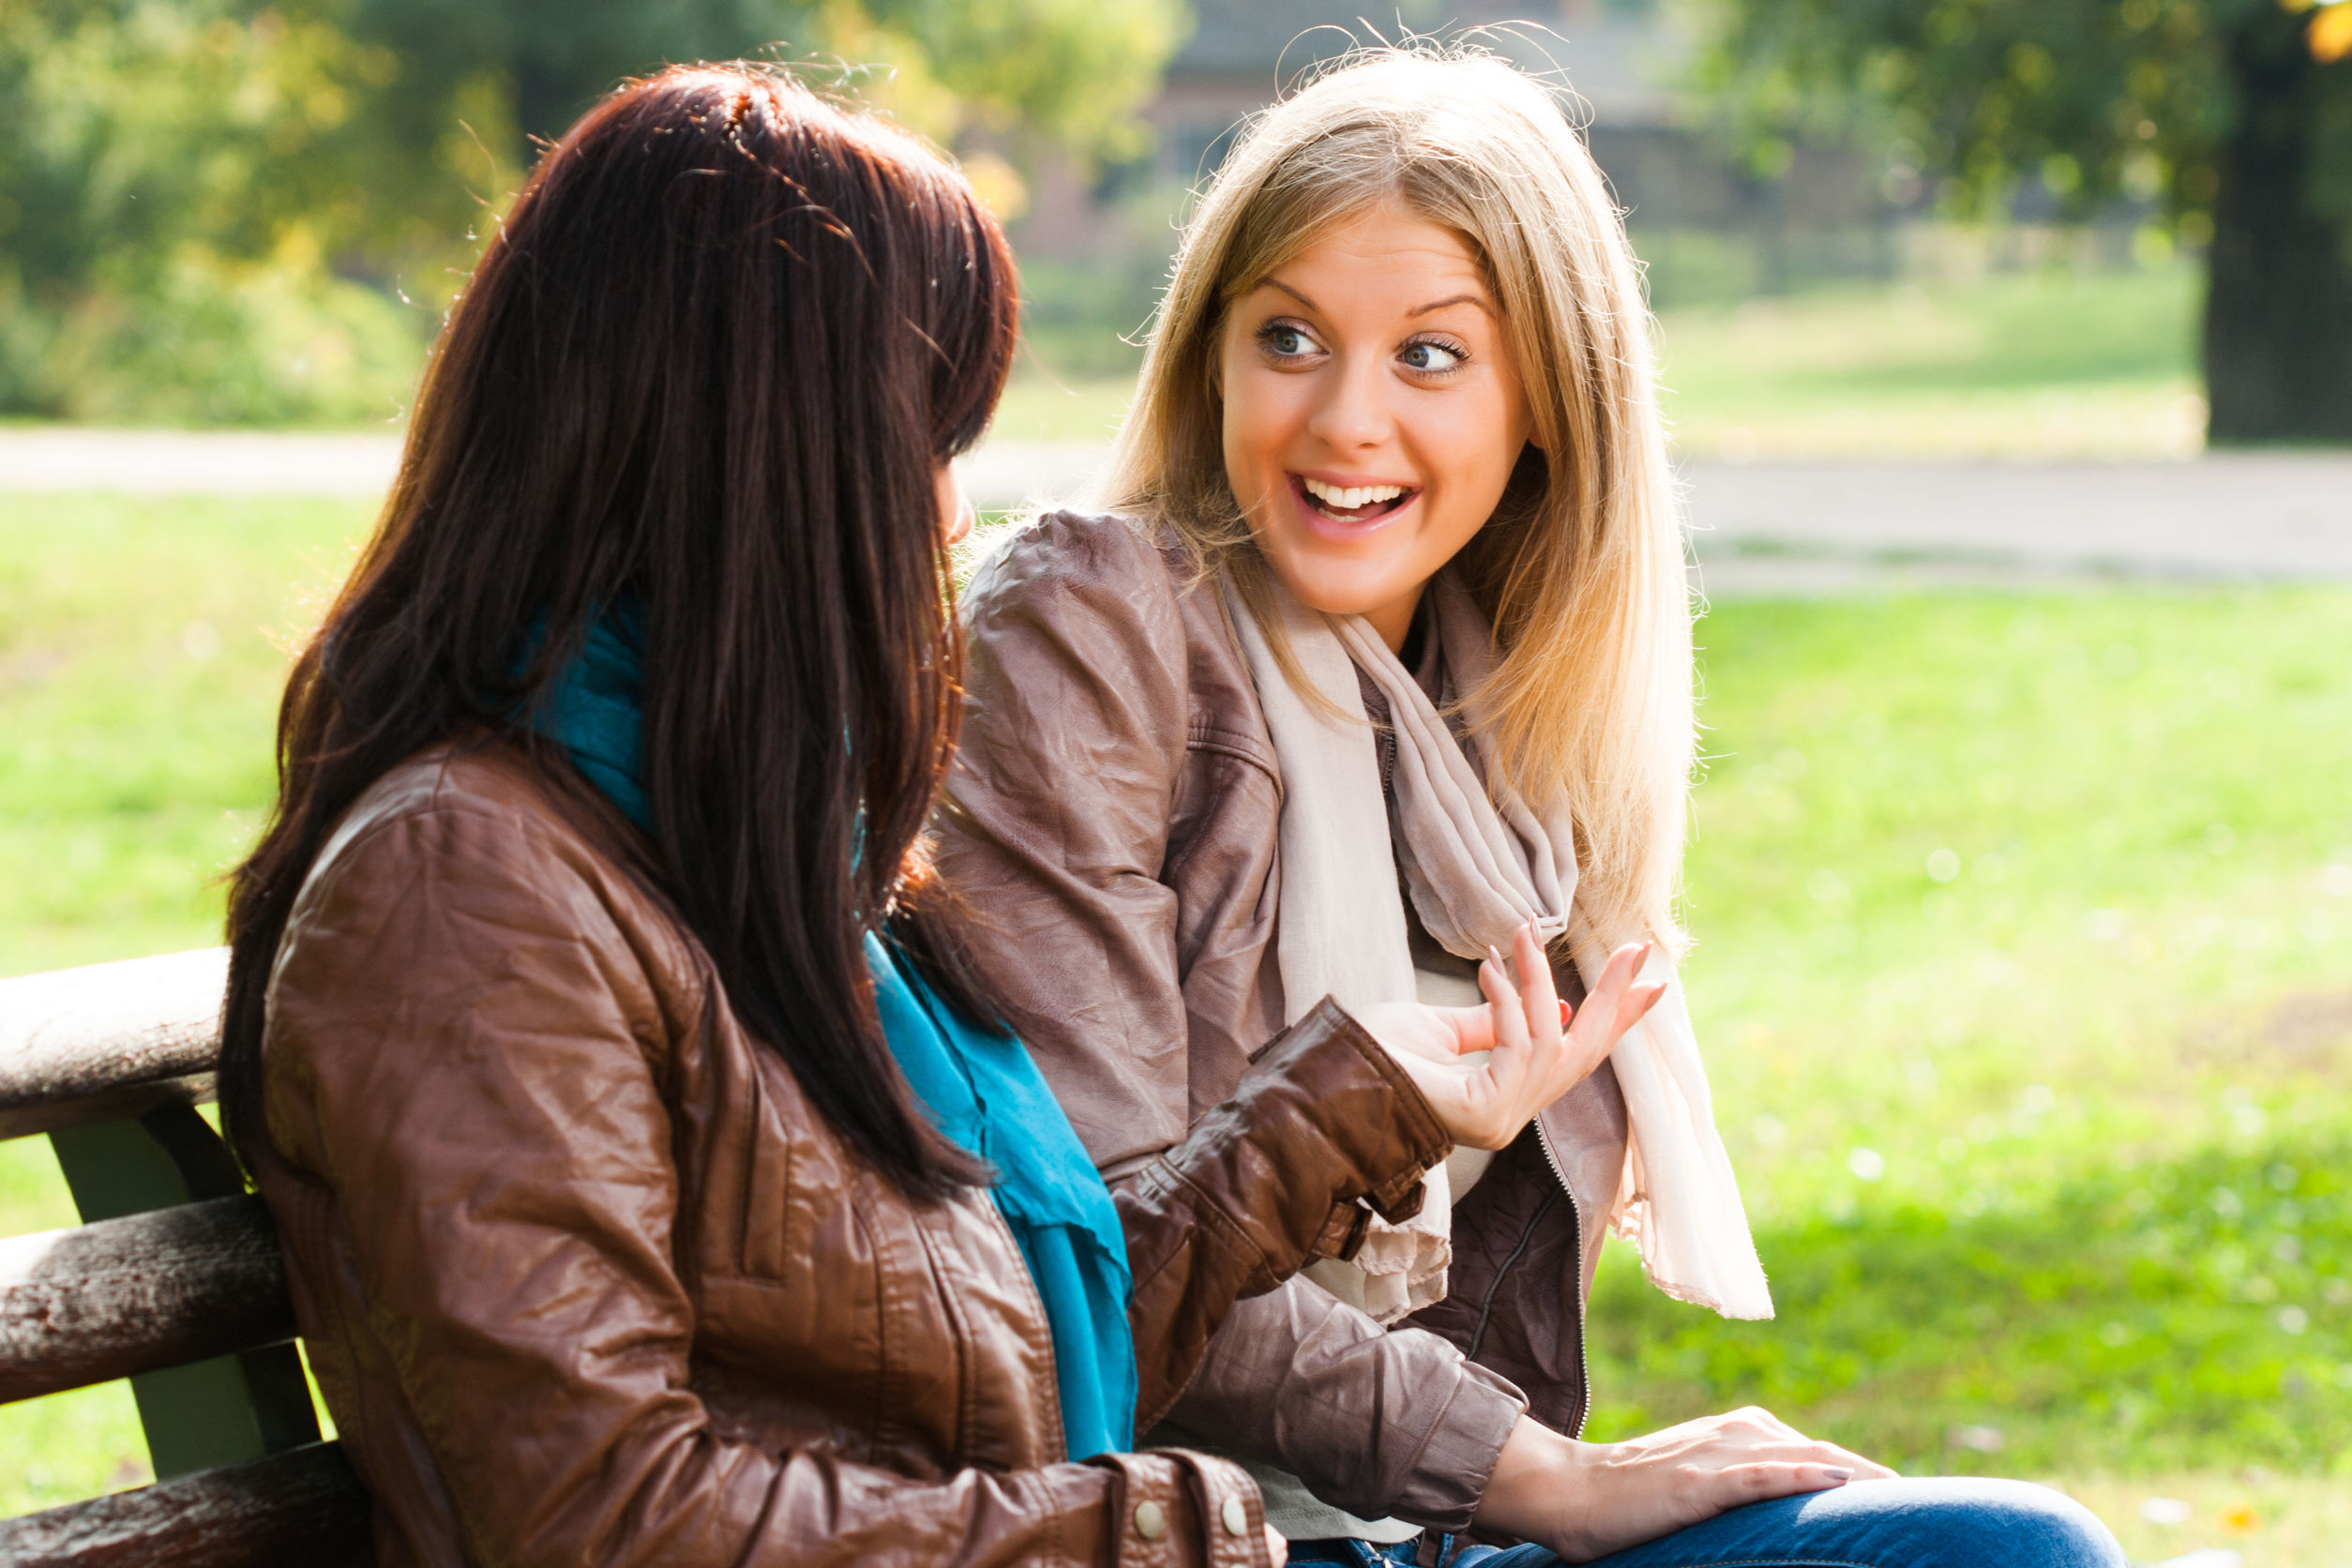 Two women in conversation on park bench